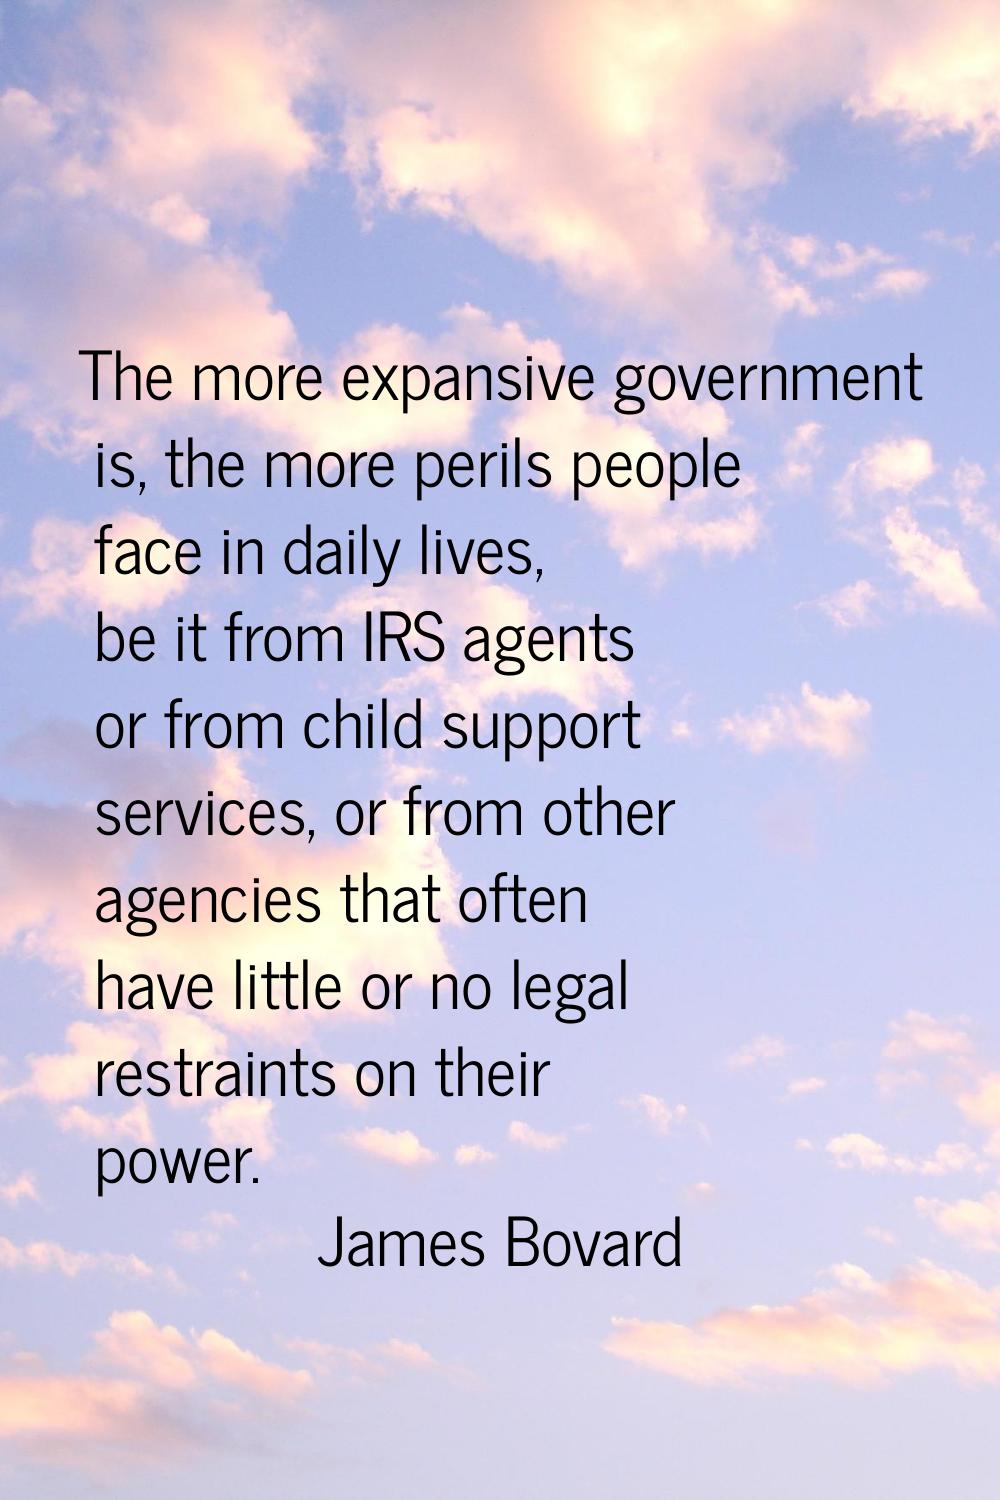 The more expansive government is, the more perils people face in daily lives, be it from IRS agents